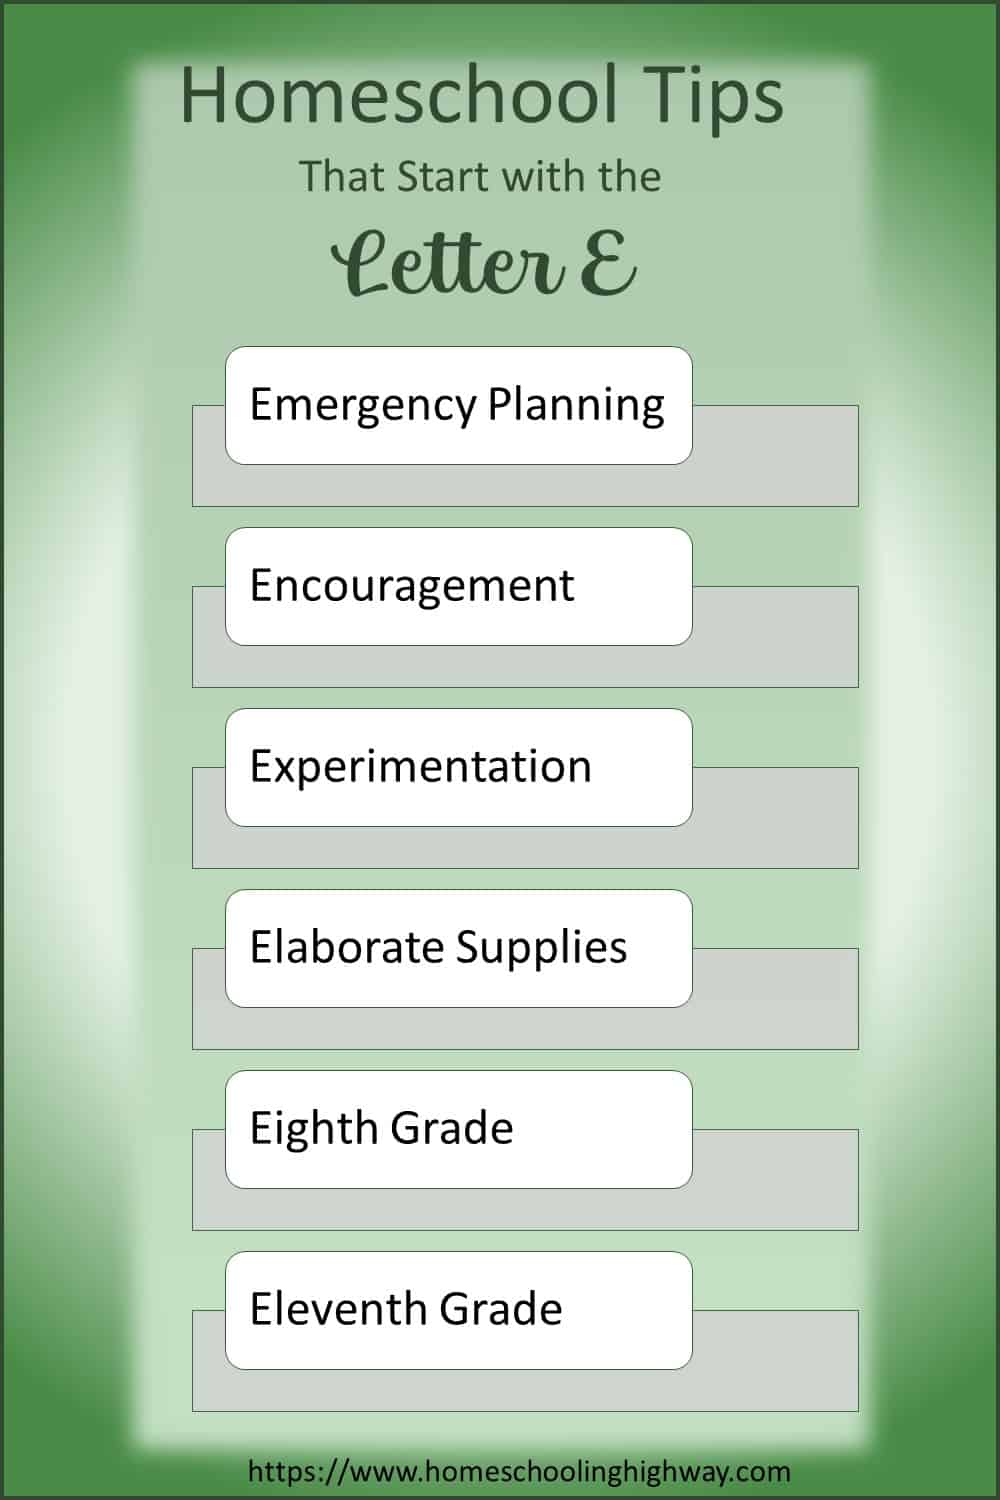 Homeschooling Tips That Start With E. Emergency Planning, Encouragement, Experimentation, Elaborate Supplies, Eight Grade, Eleventh Grade